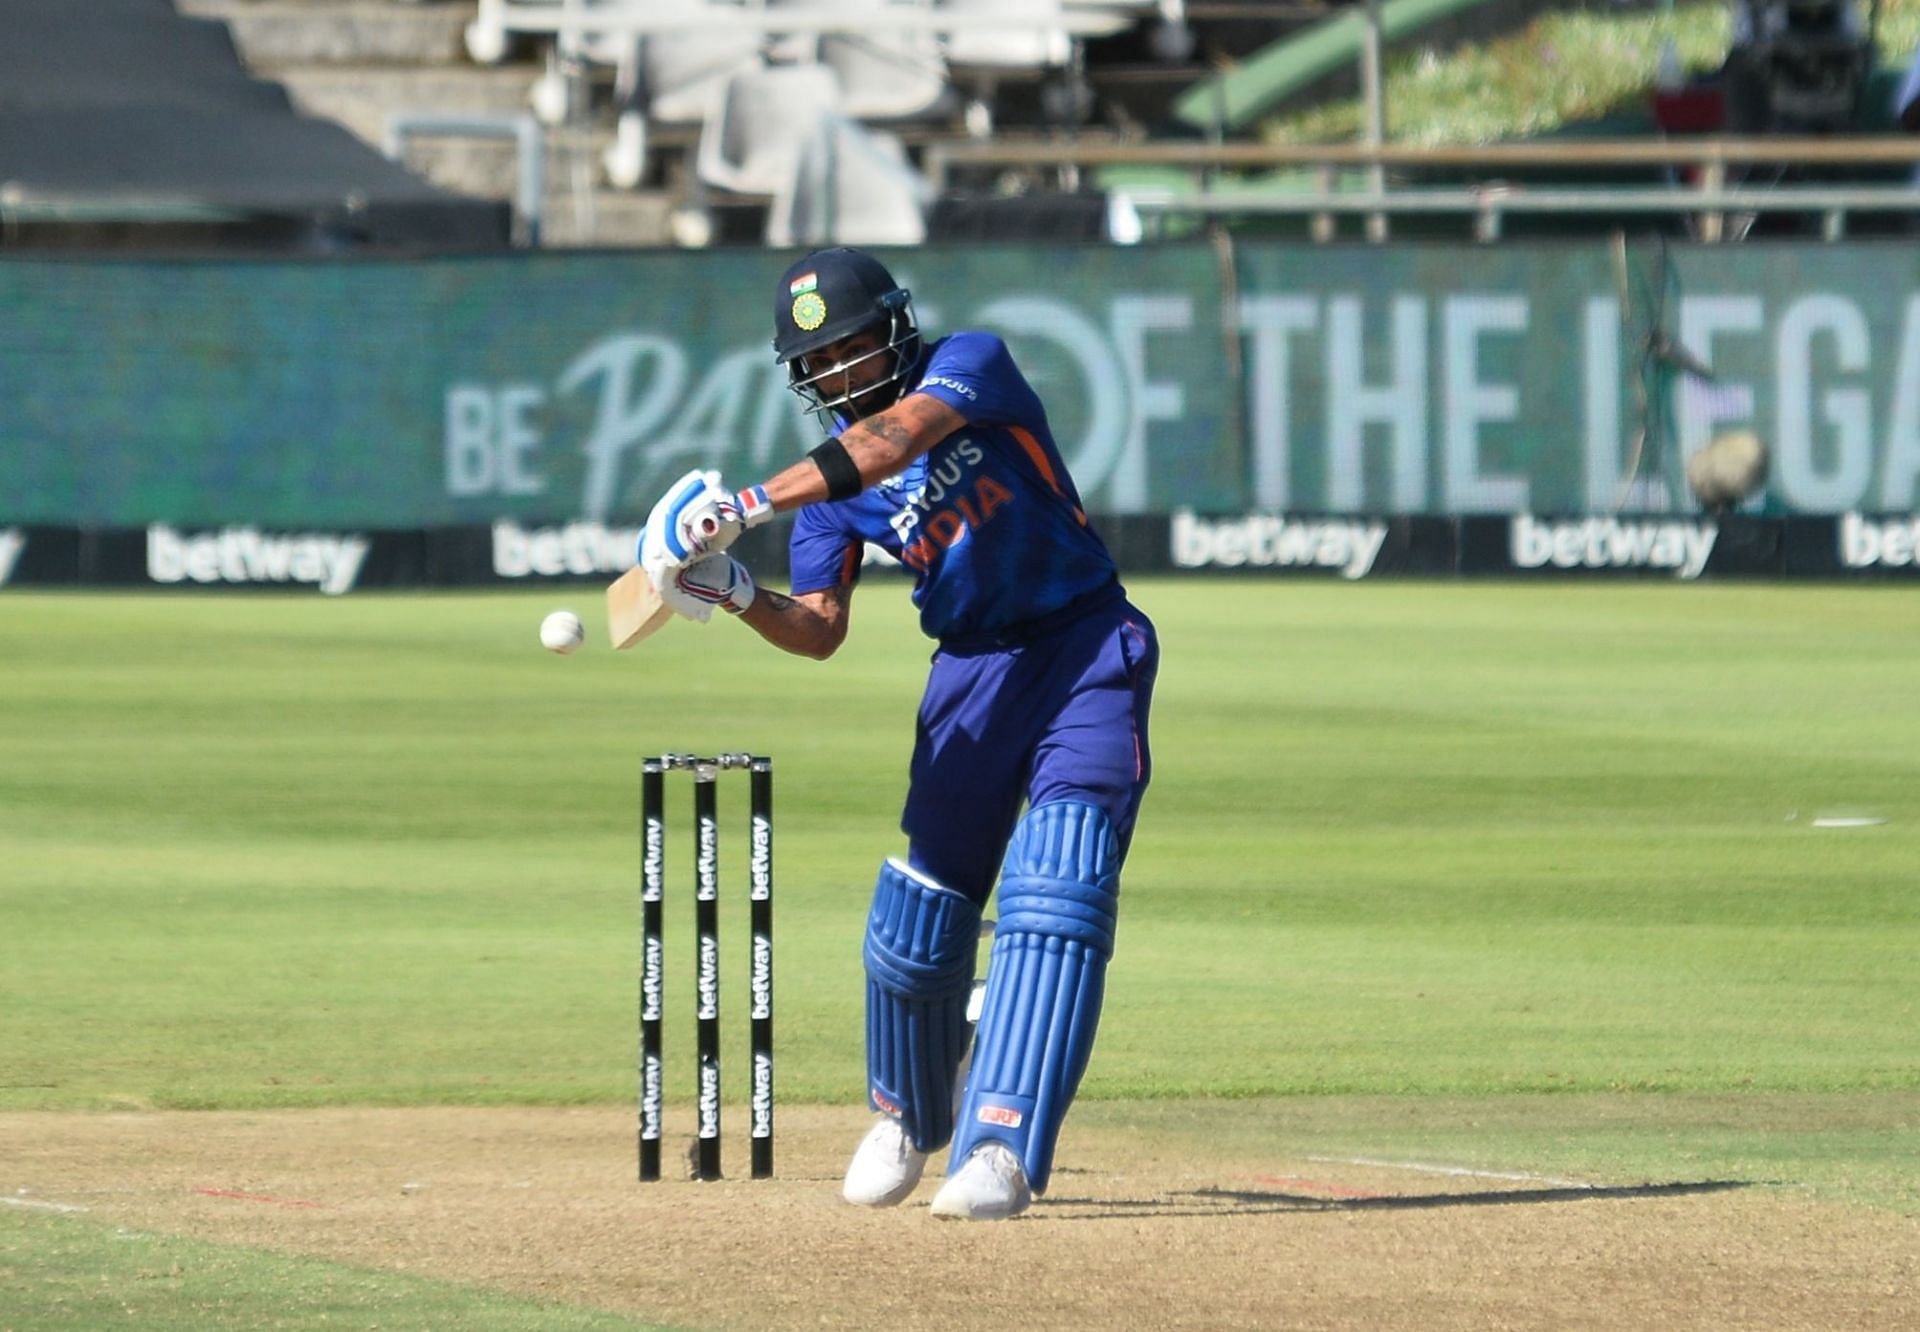 Virat Kohli seemed to be in a hurry in the first ODI against West Indies